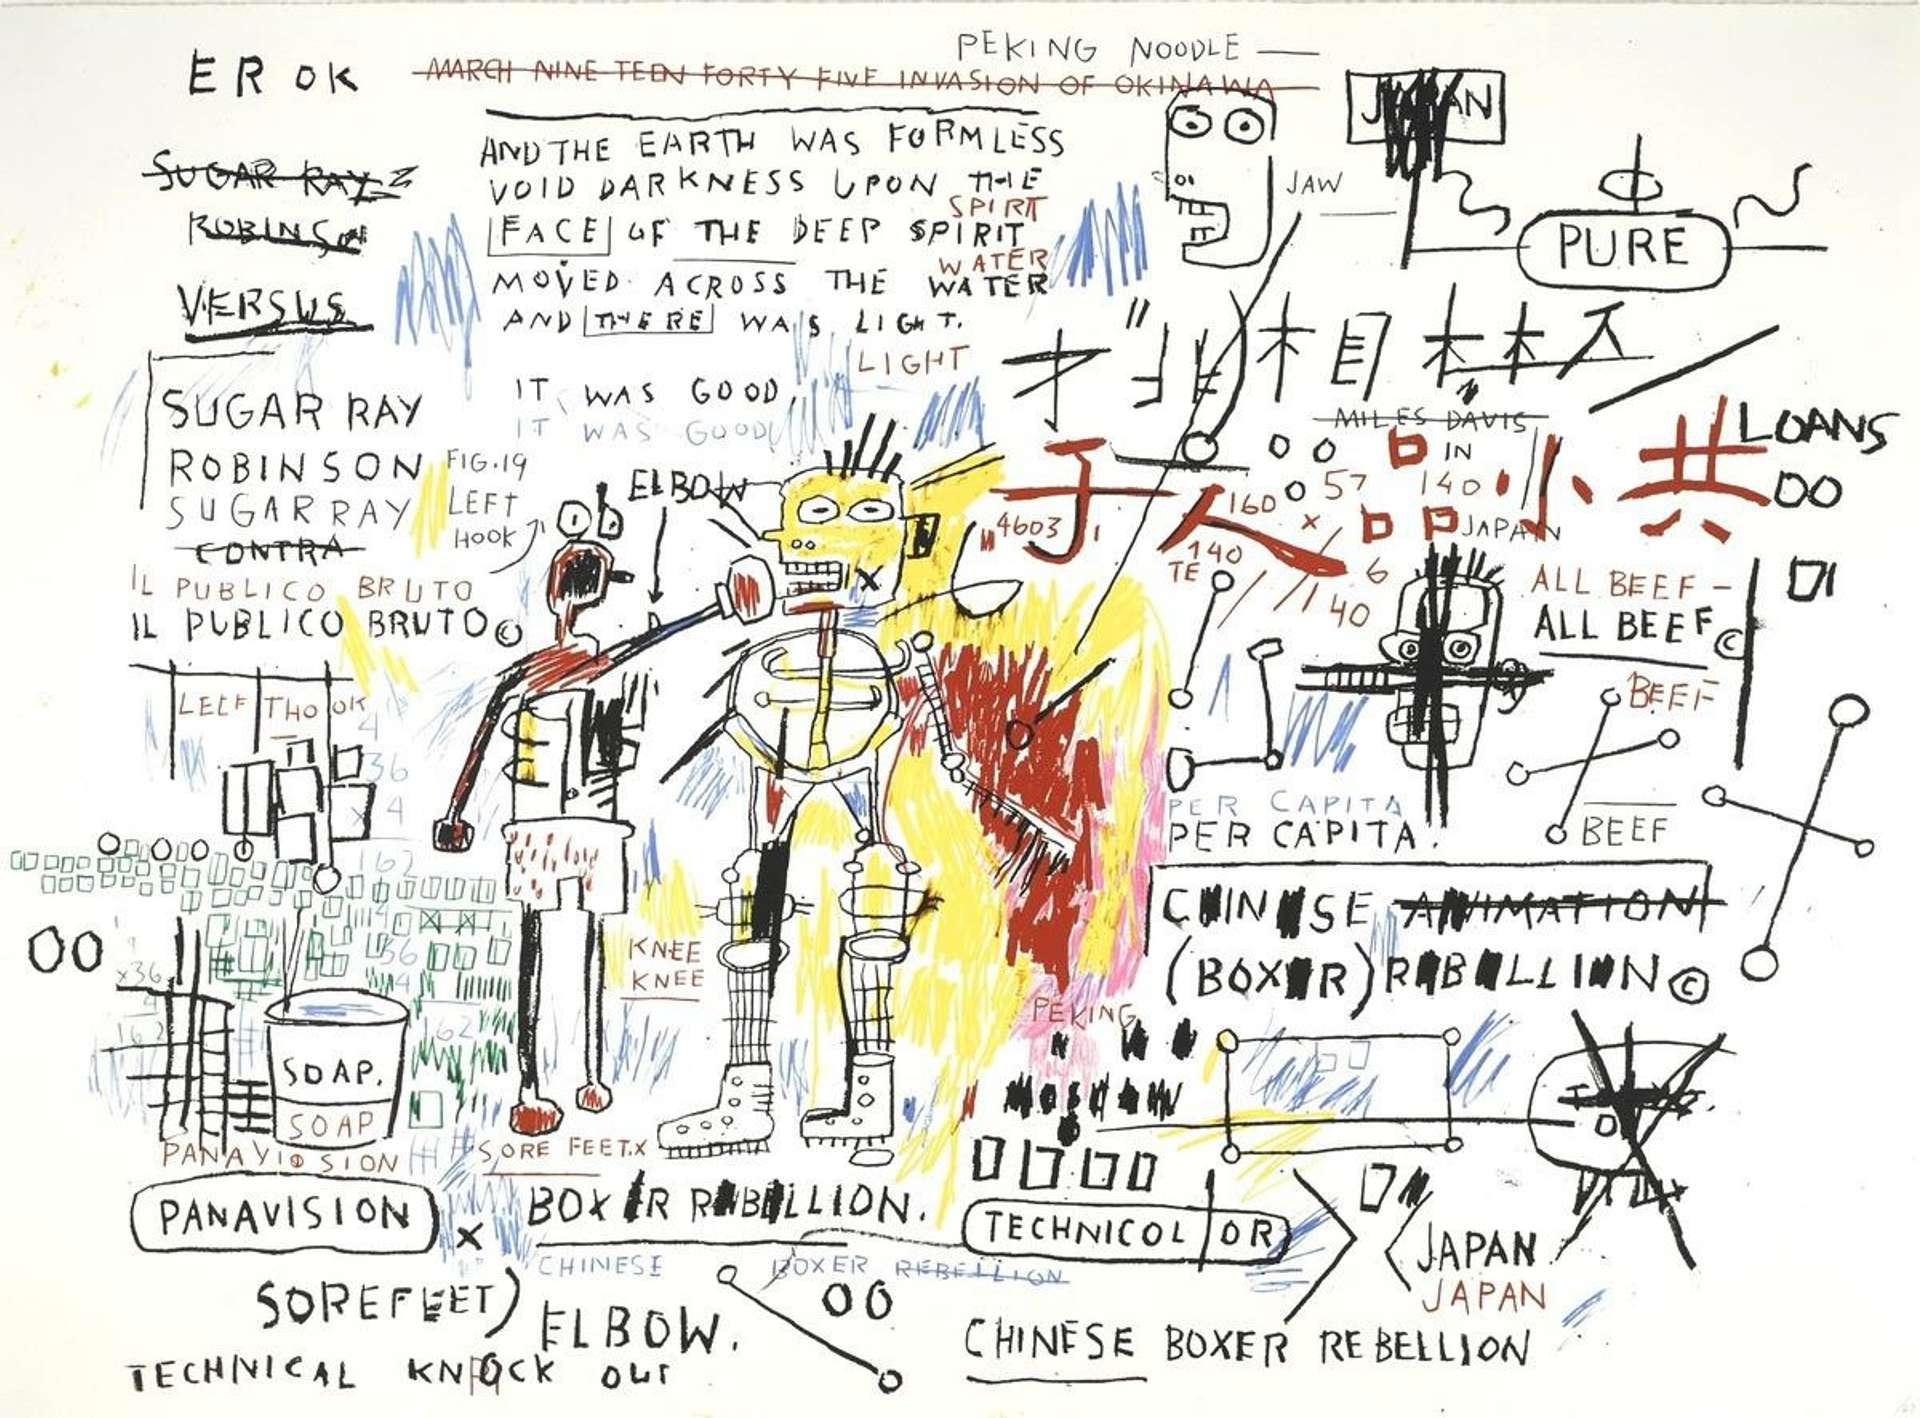 Jean-Michel Basquiat’s Boxer Rebellion. A Neo-Expressionist screenprint of a variety of texts, symbols, and characters against a white background. 